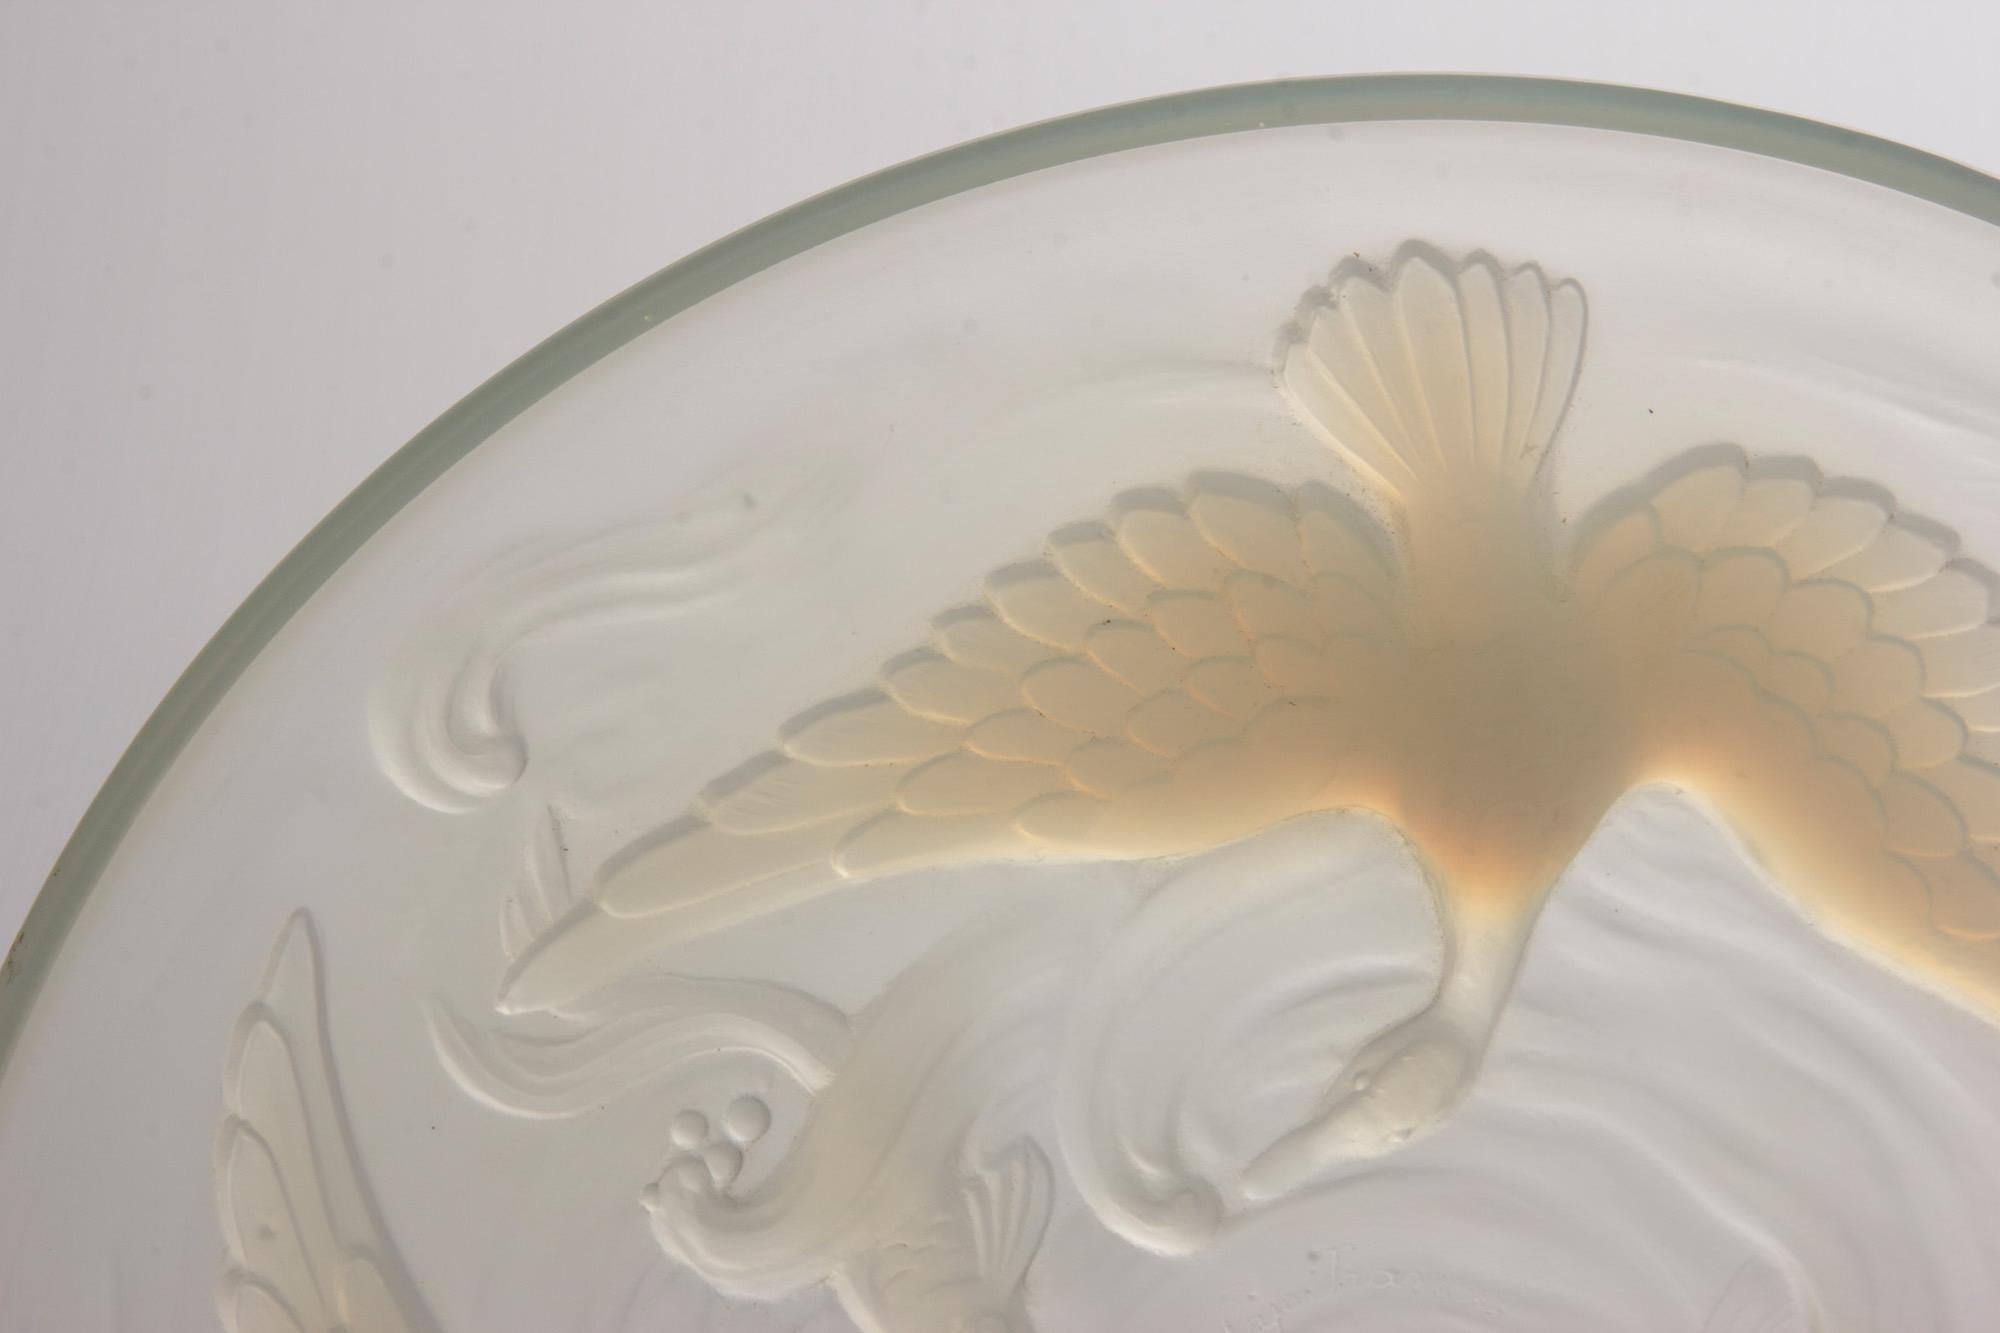 Art Deco Opalescent Glass Bowl with a design of gulls and fish, Signed Verlys
H: 5cm W: 36cm D: 36cm
French circa 1928.
   